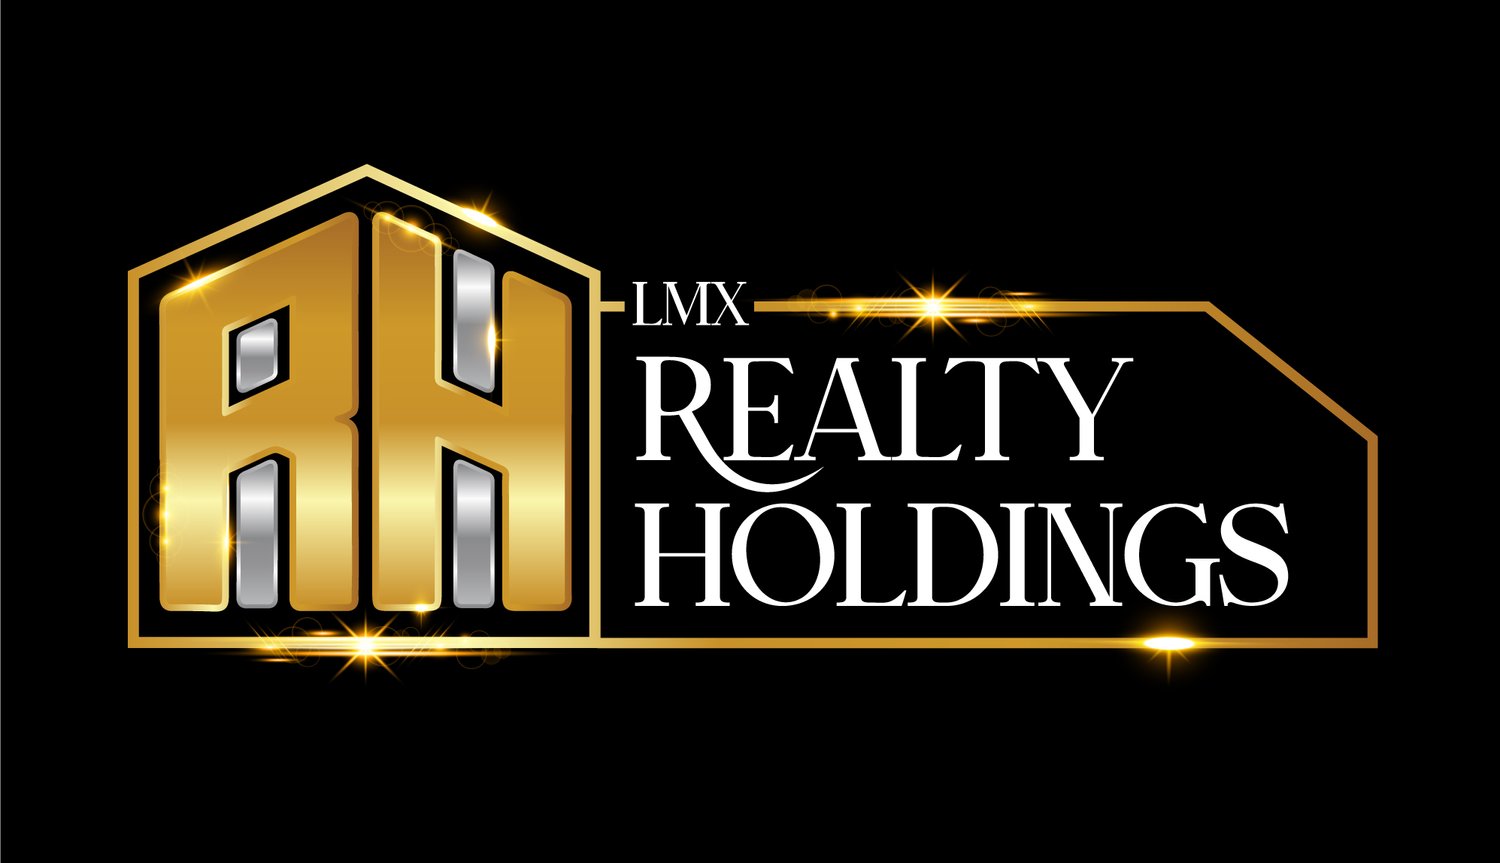 LMX REALTY HOLDINGS